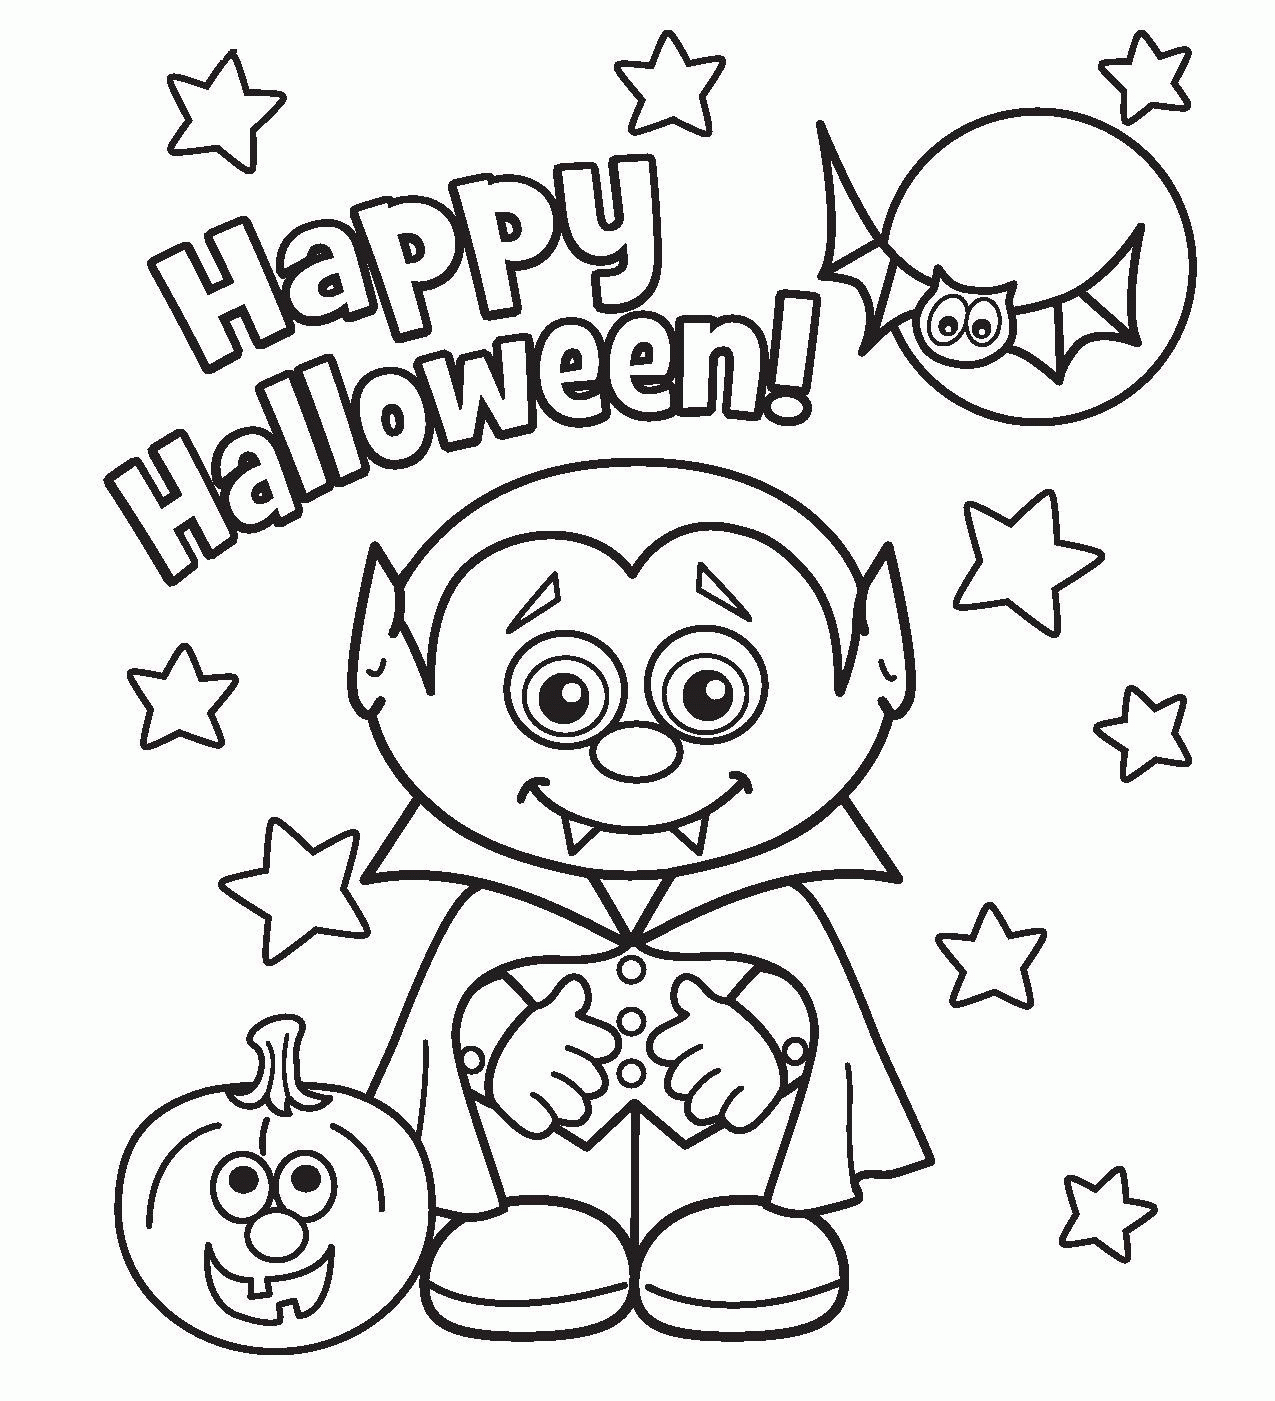 Halloween Coloring Pages For Older Kids - Coloring Home